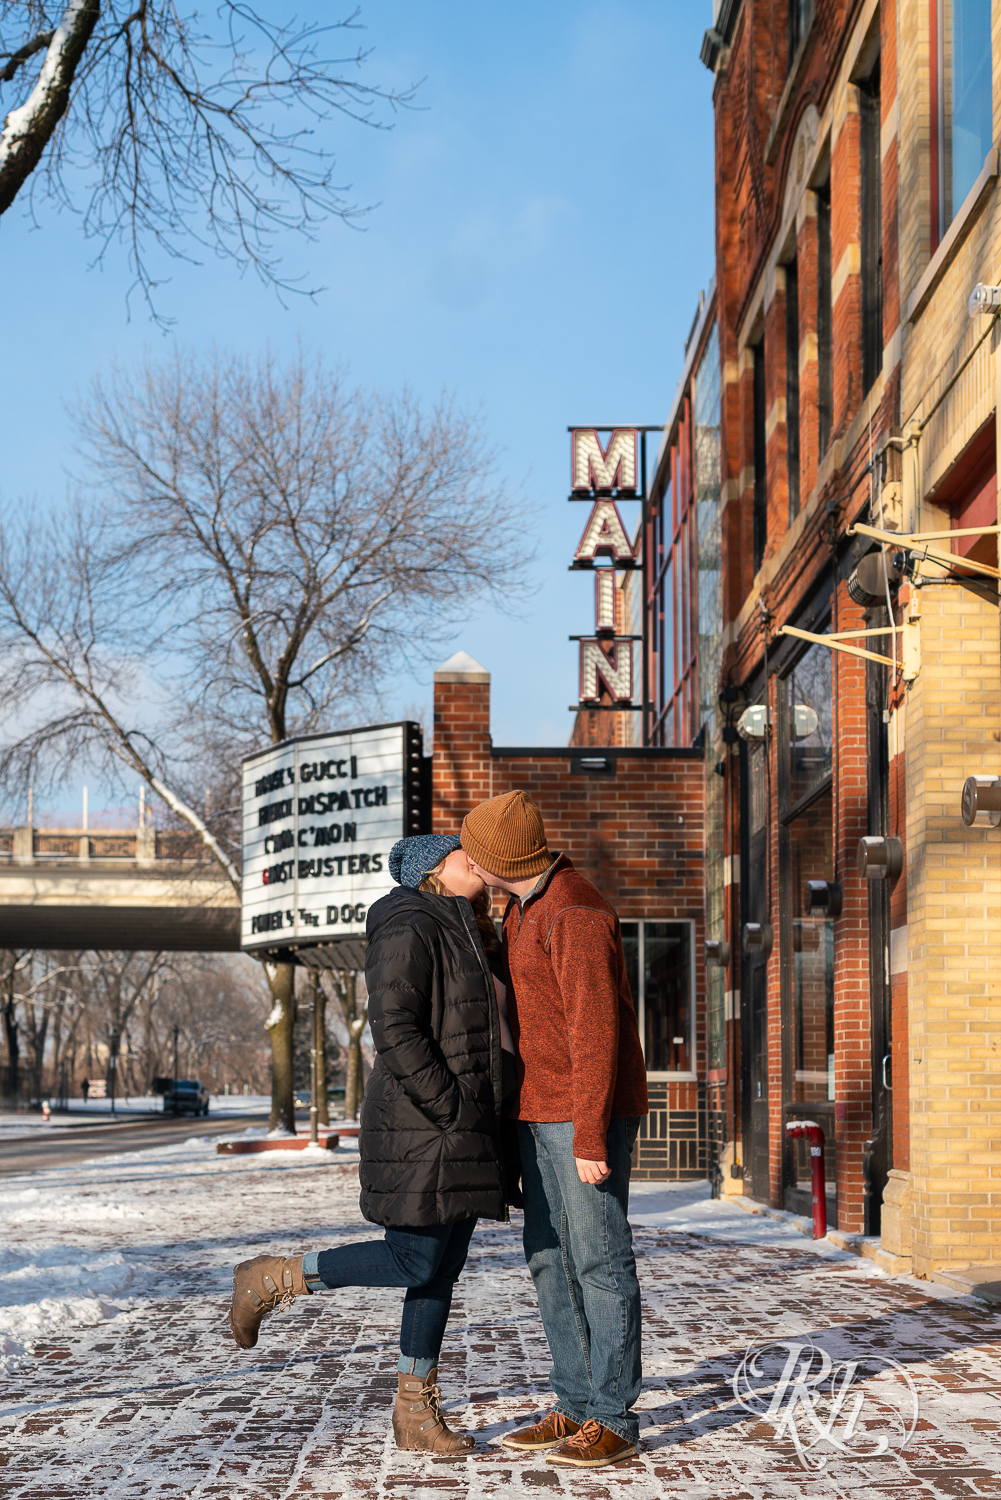 Man and woman kissing in the snow in front of movie theater in Saint Anthony Main in Minneapolis, Minnesota.